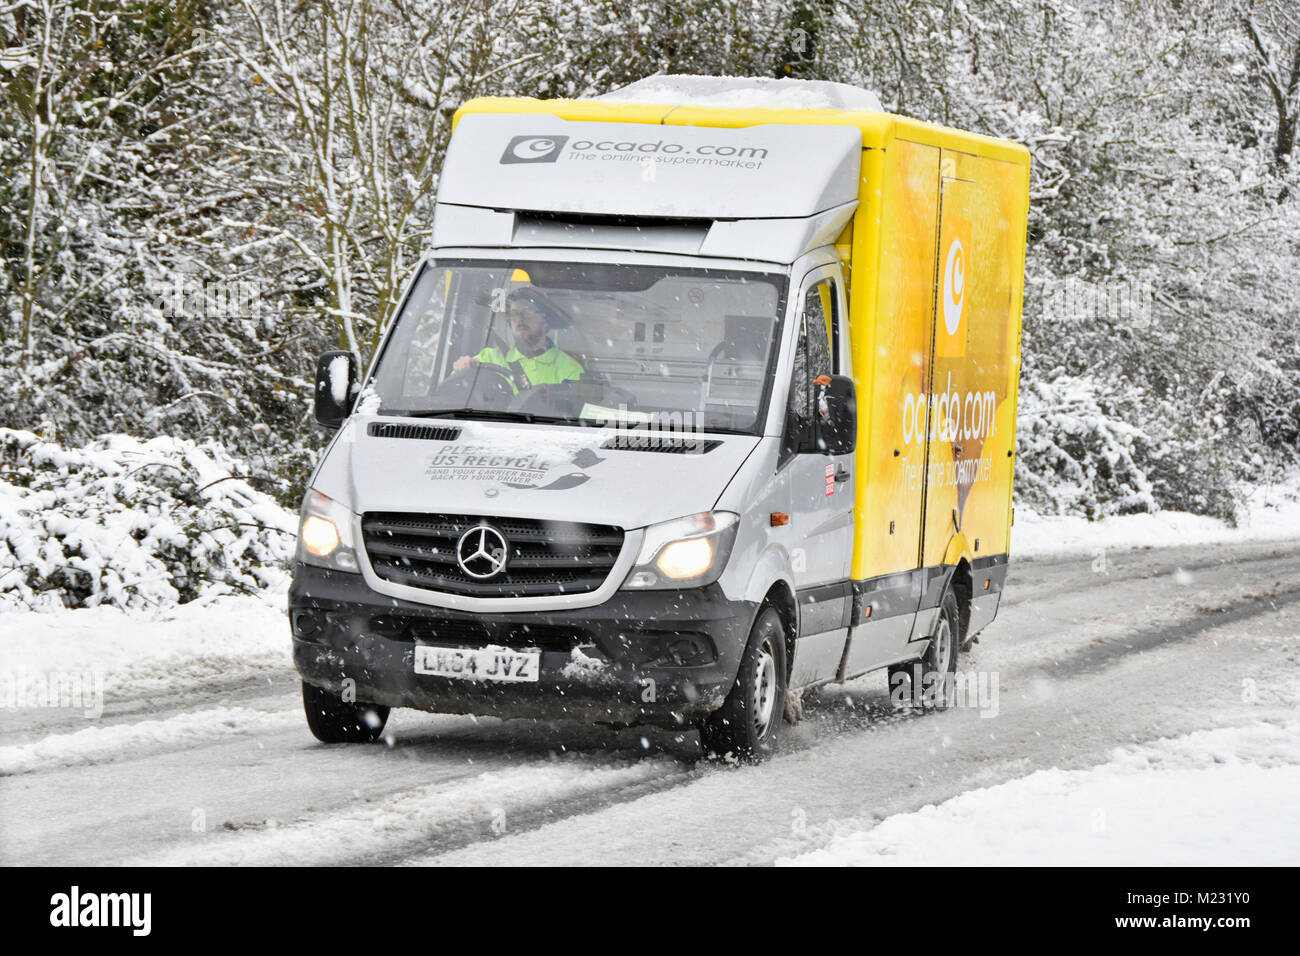 Ocado internet food grocery supermarket delivery van on snow covered winter road making home delivery trips to online shopping customers England UK Stock Photo